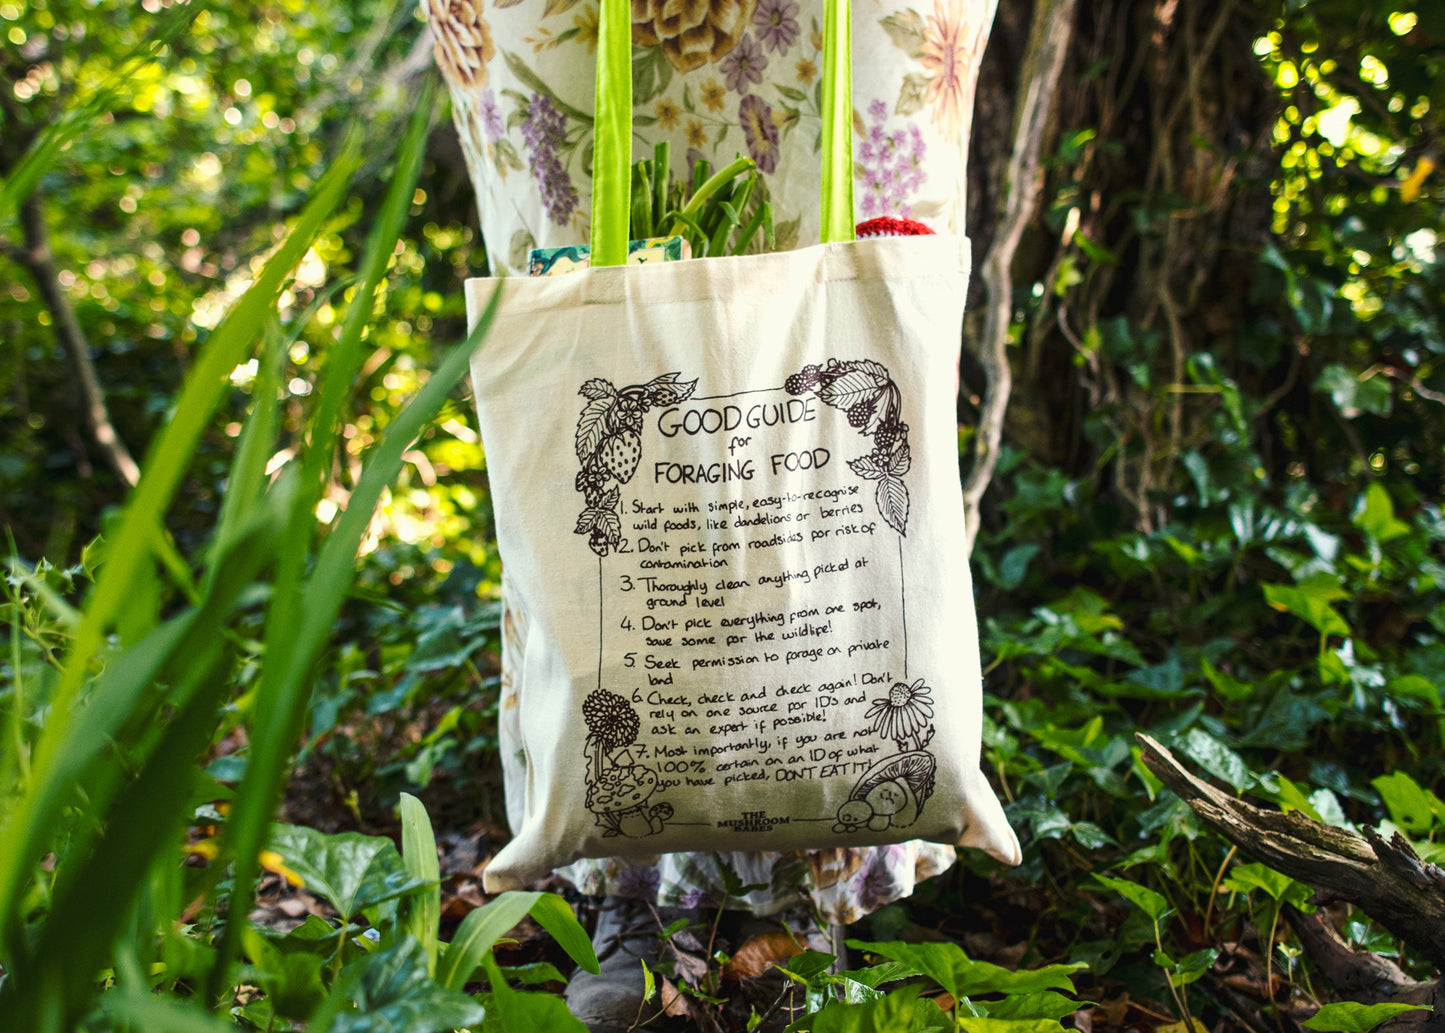 Good Guide For Foraging Food Tote Bag